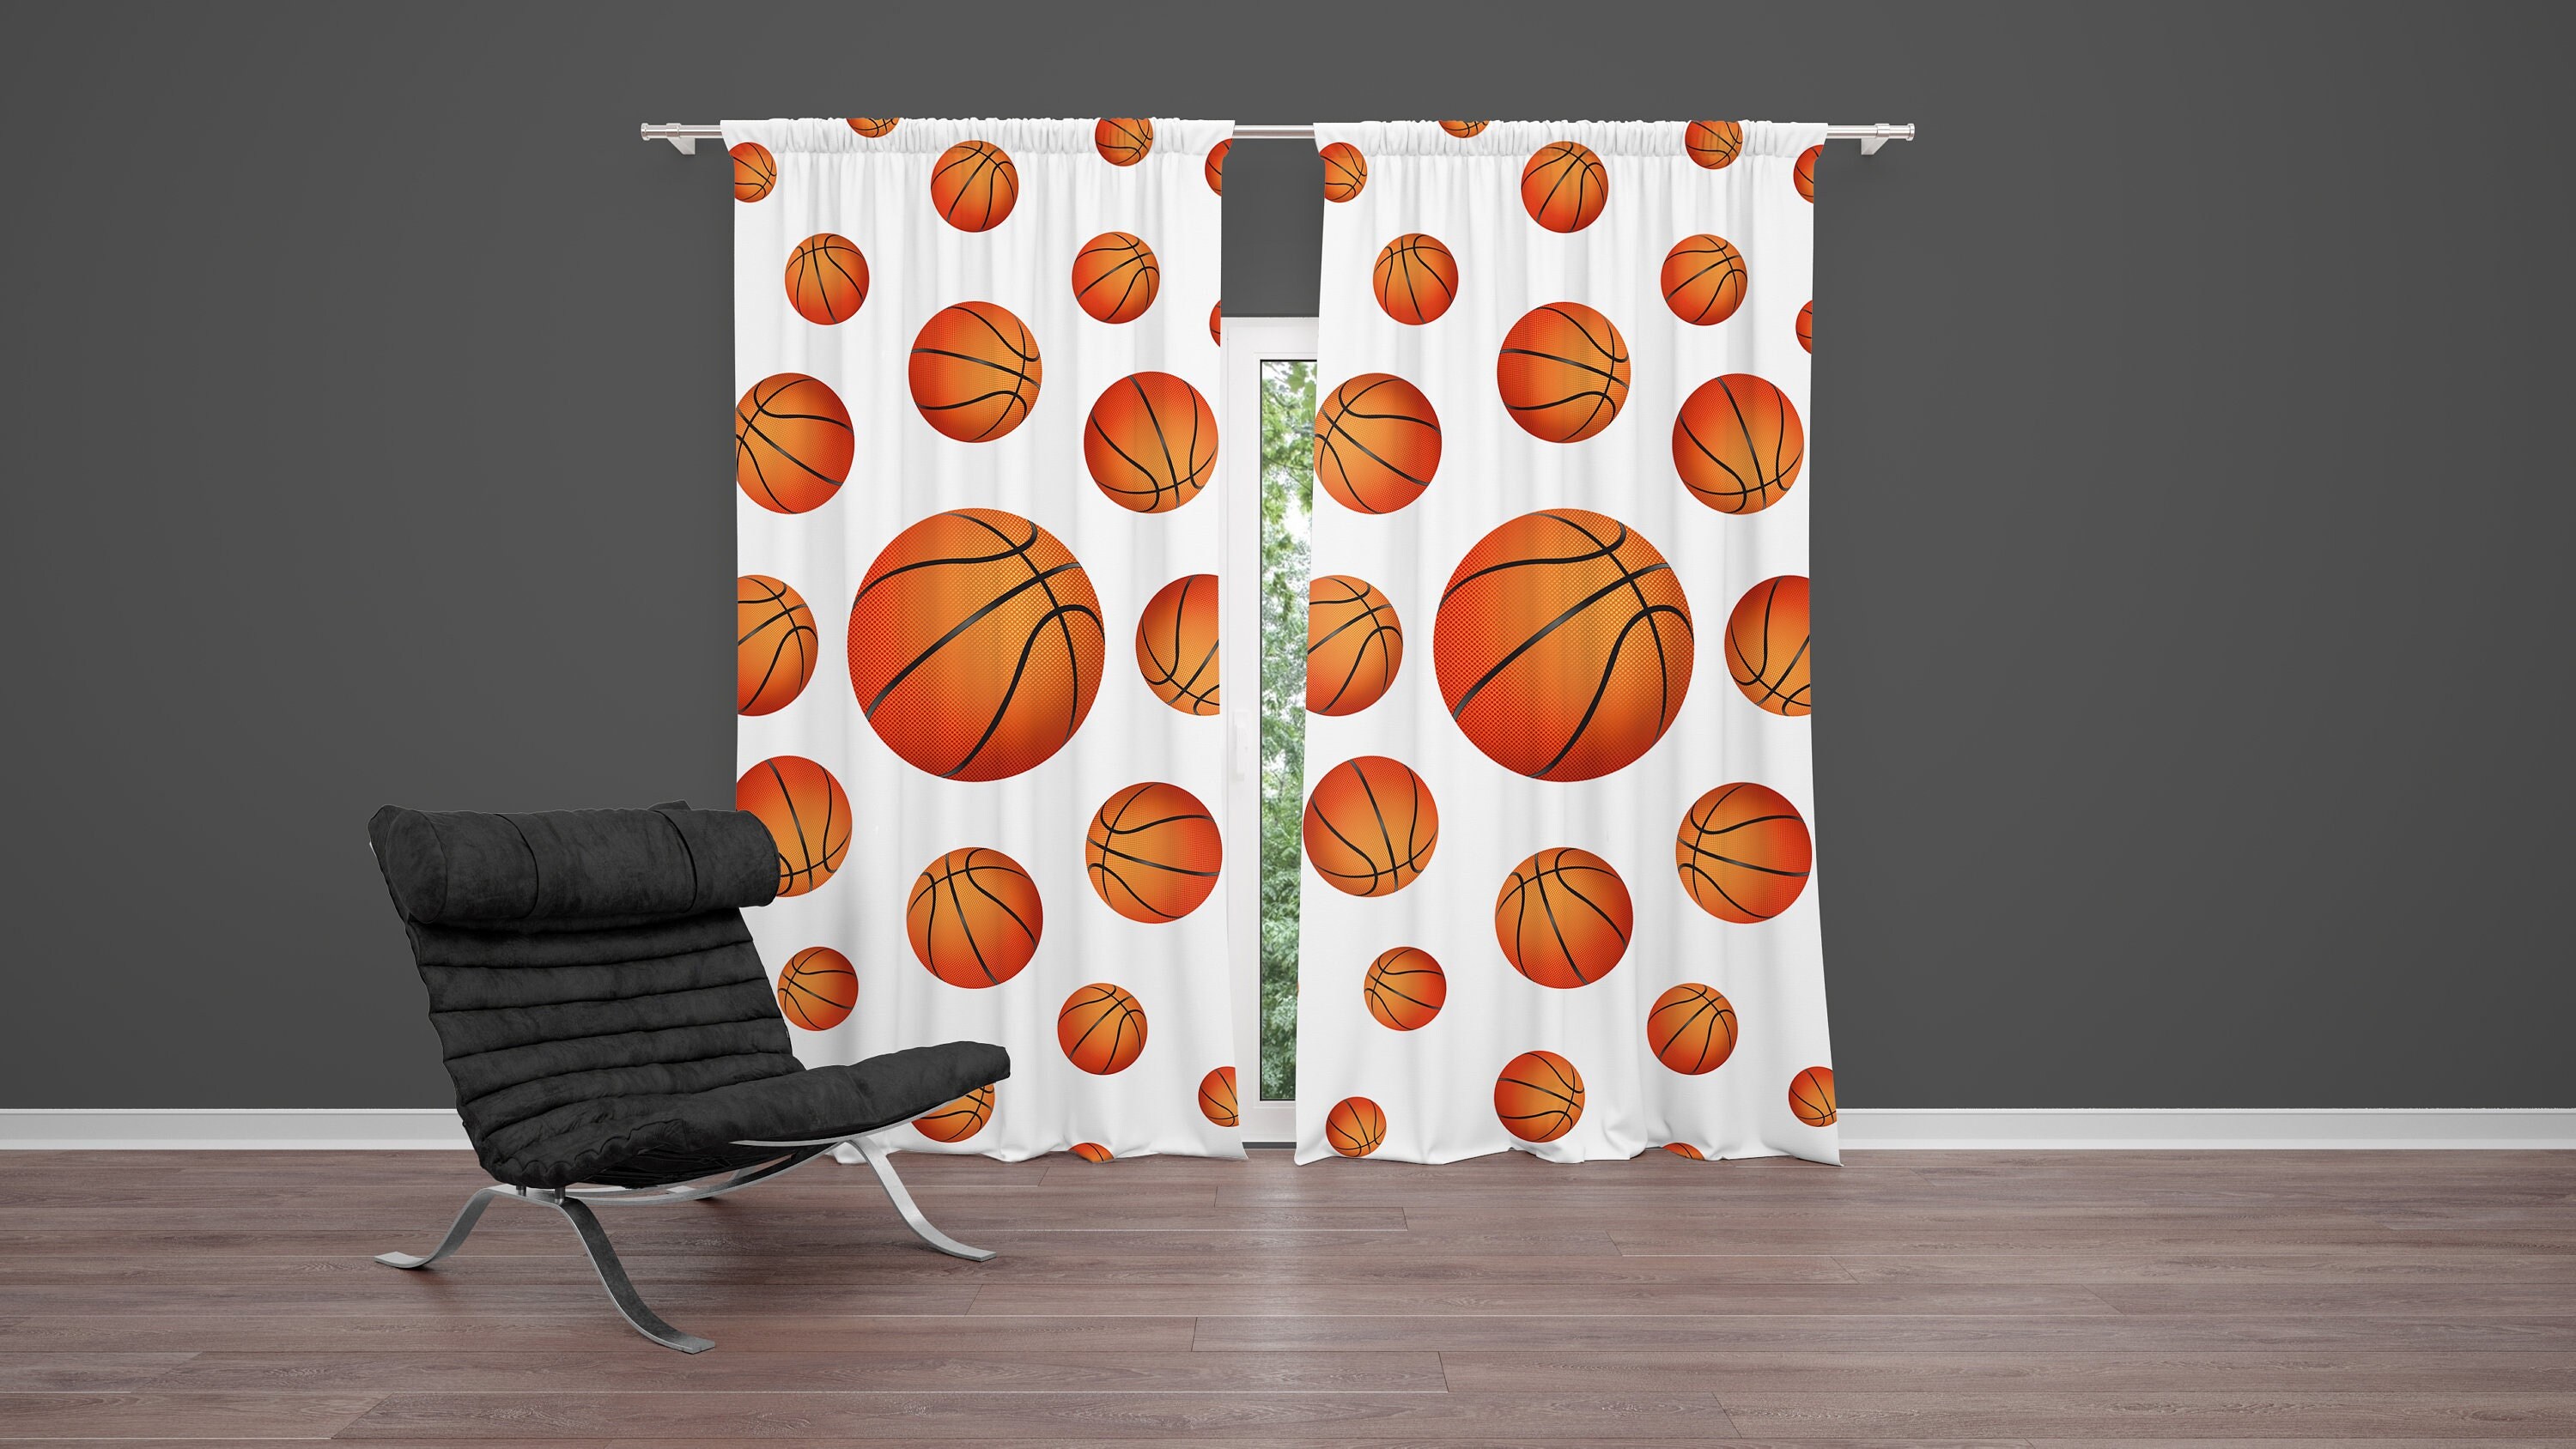  Vercico Sports Shower Curtain Set for Bathroom Decor Shower  Curtain,Boy Football Curtain for Bathroom Showers and Bathtubs, 72 x 72  inches Long, Hooks Included : Home & Kitchen